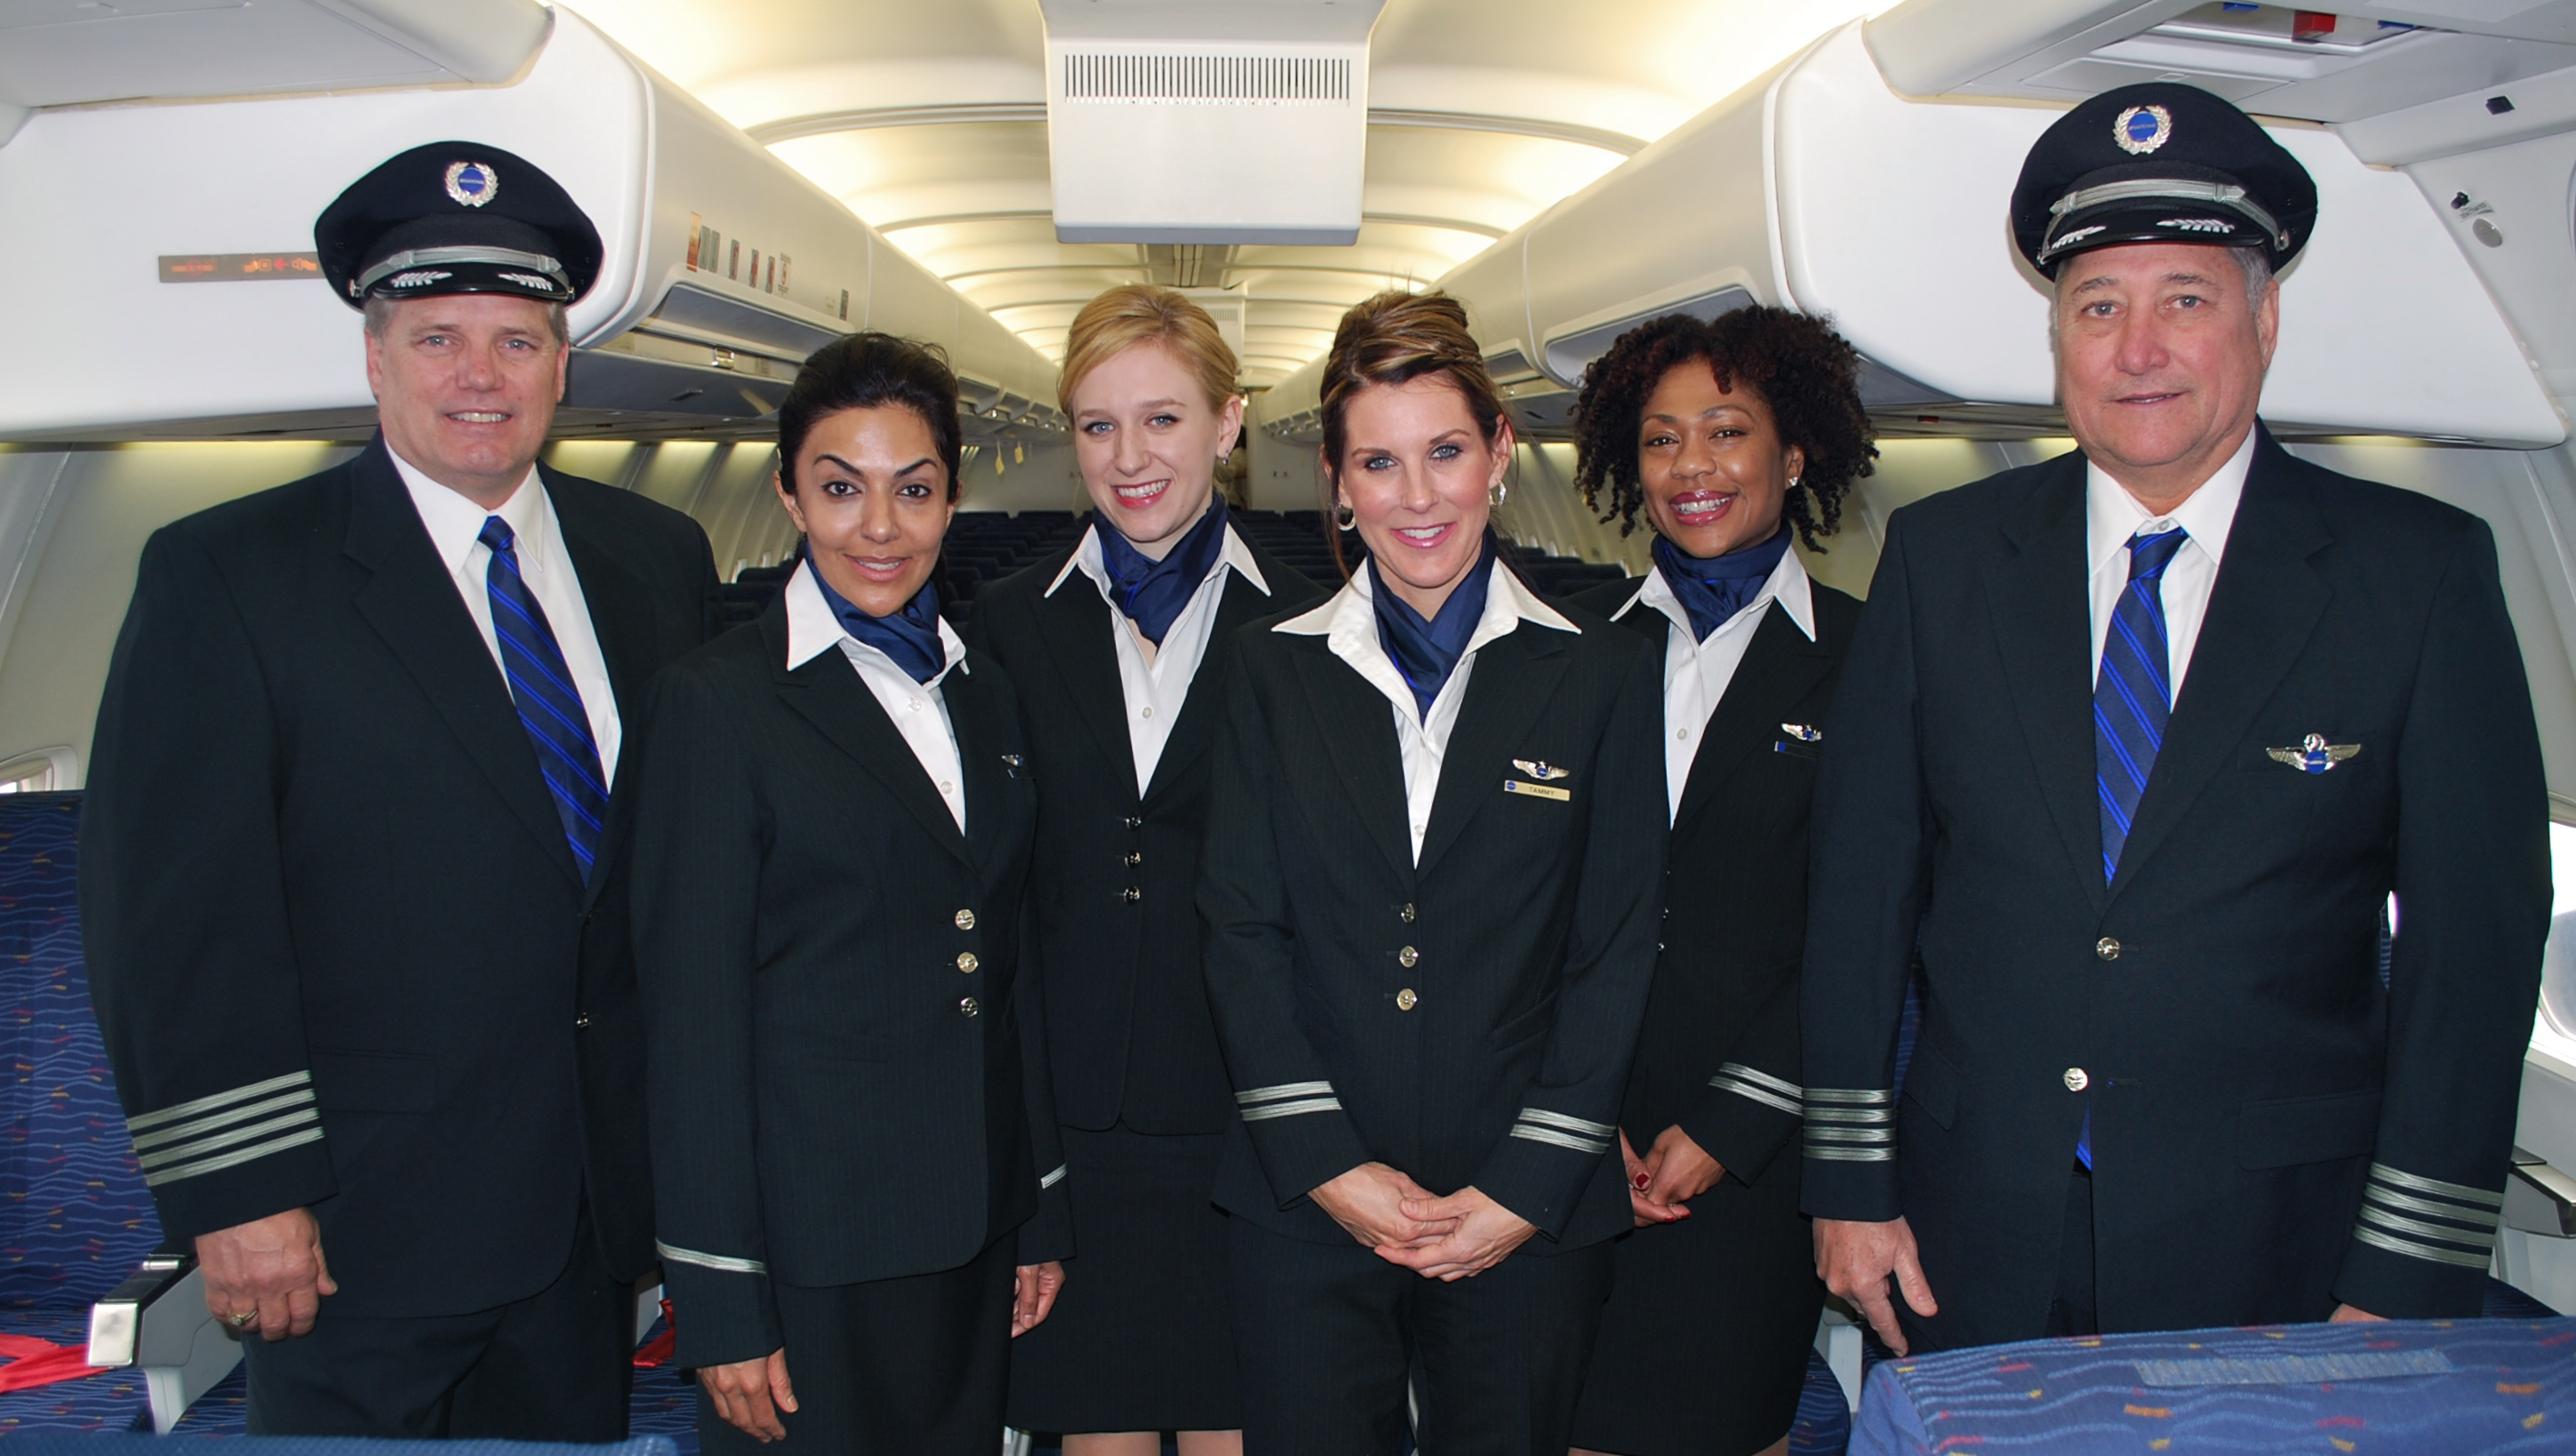 National Airlines Flight Crew